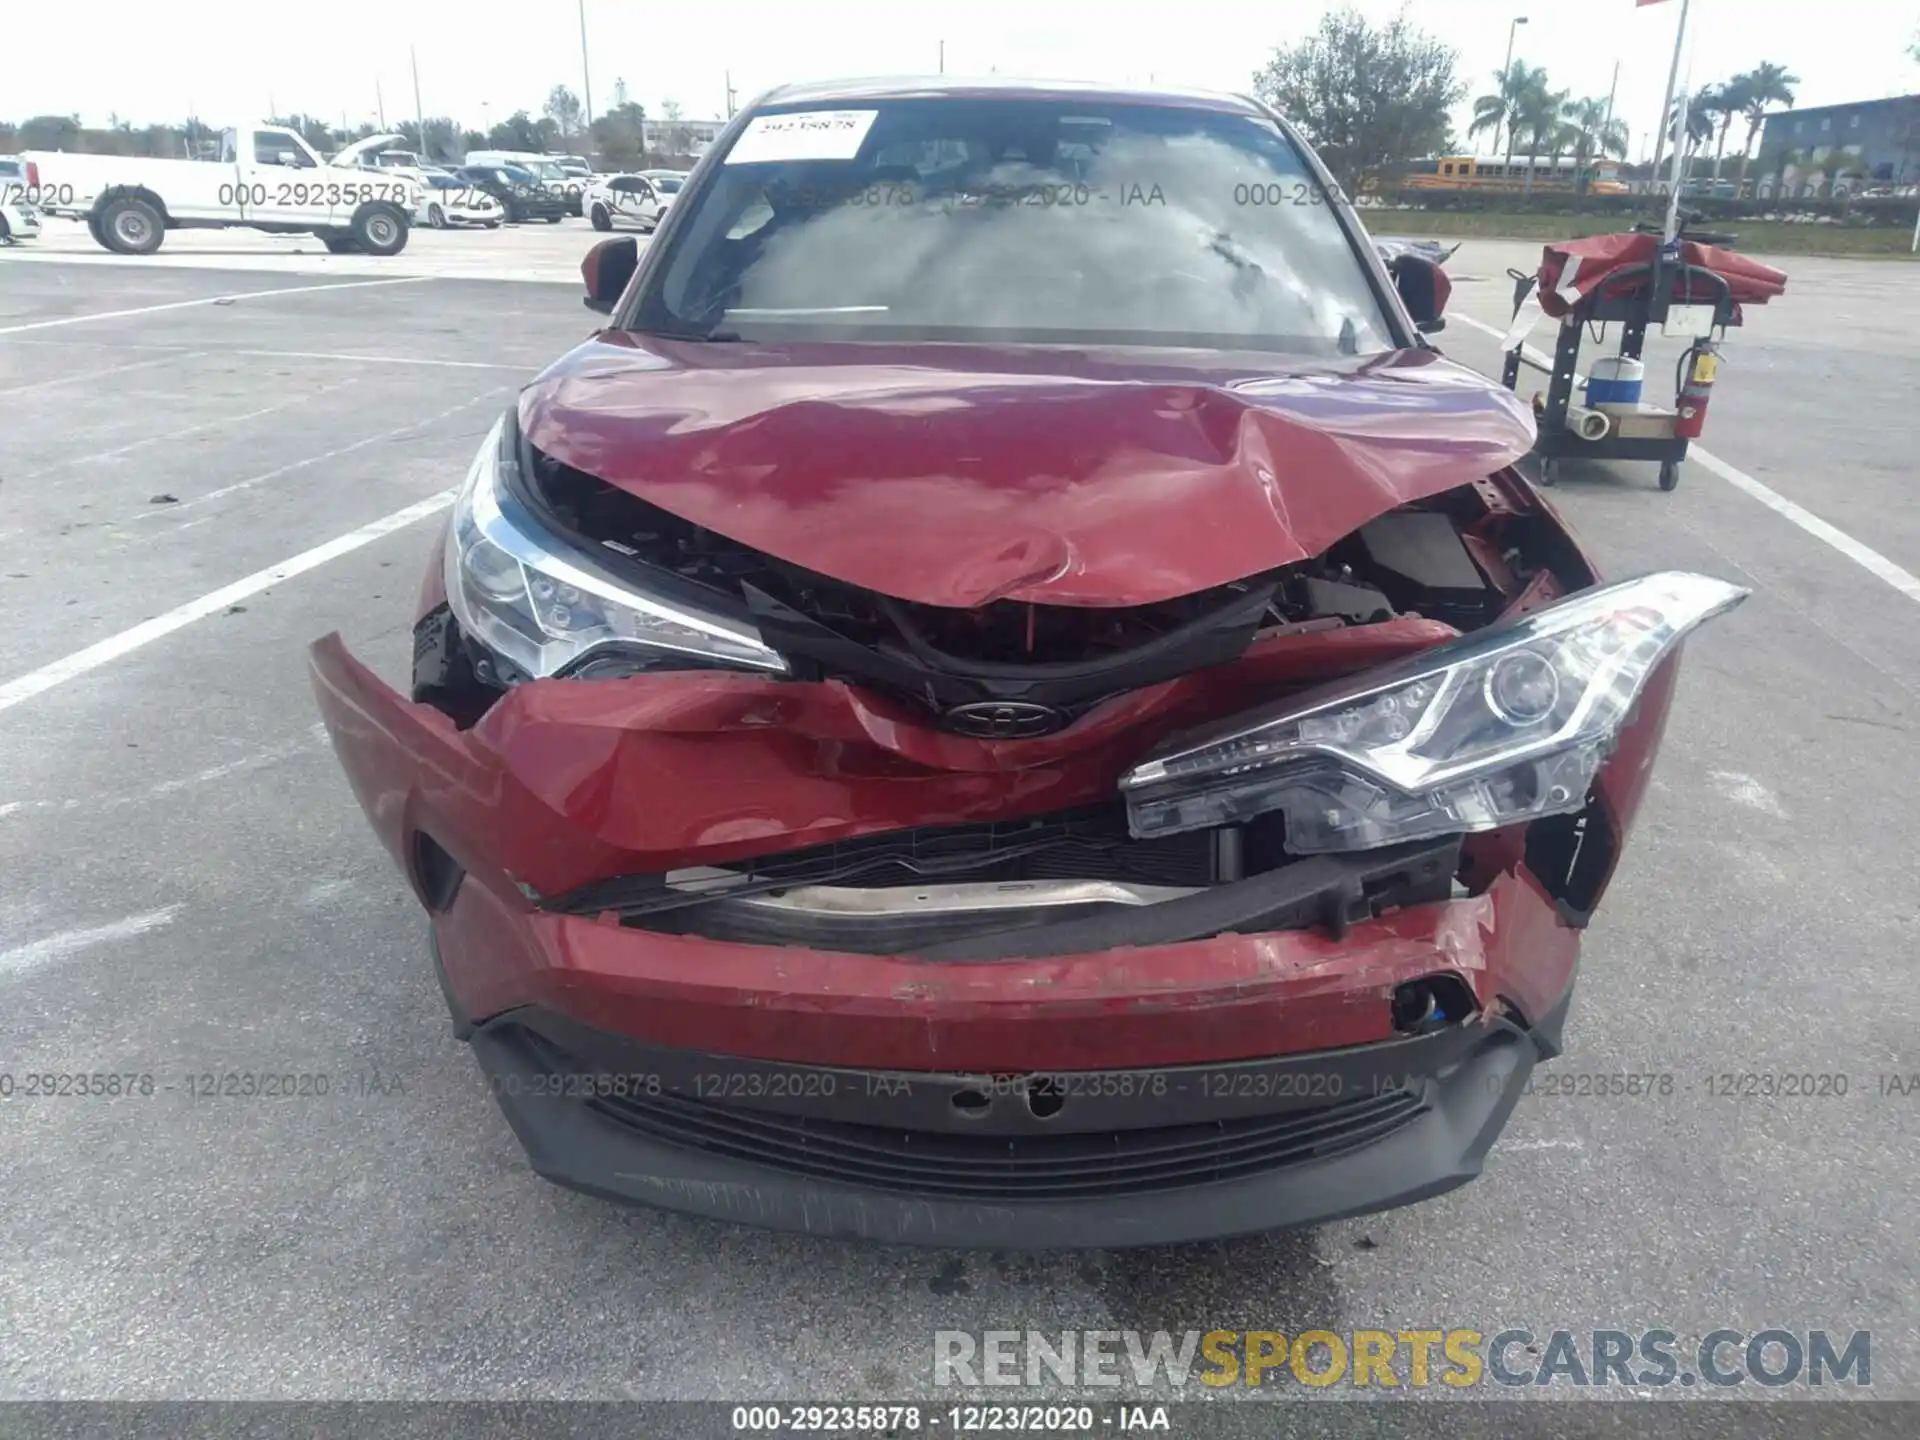 6 Photograph of a damaged car NMTKHMBXXKR087732 TOYOTA C-HR 2019